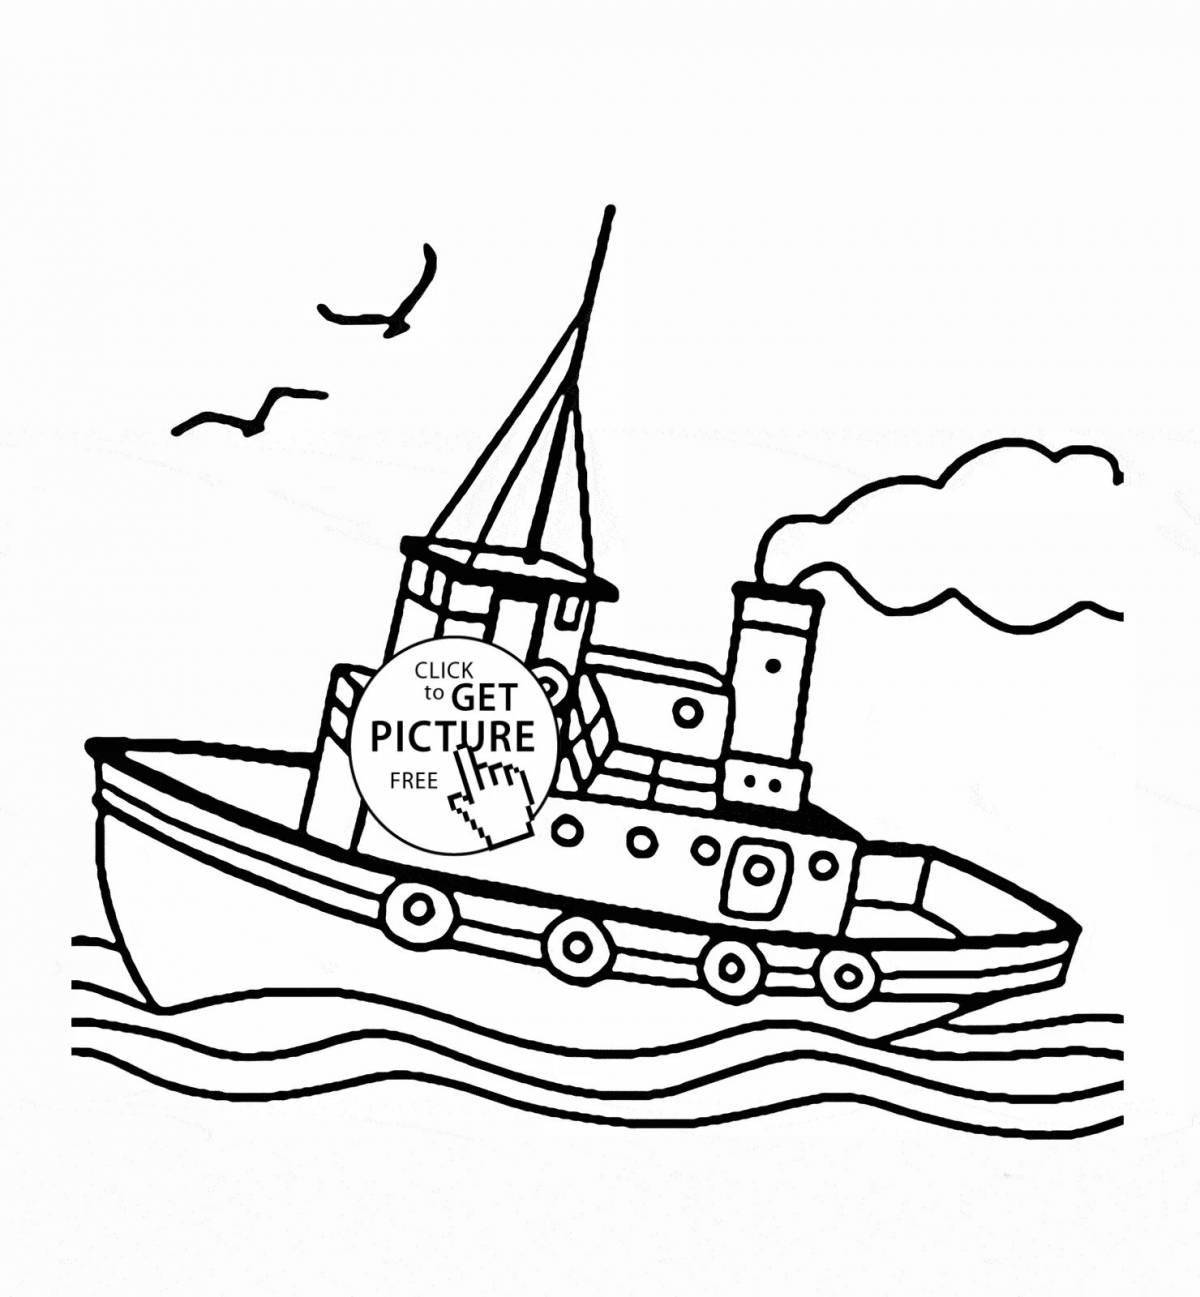 Amazing steamship coloring page for kids